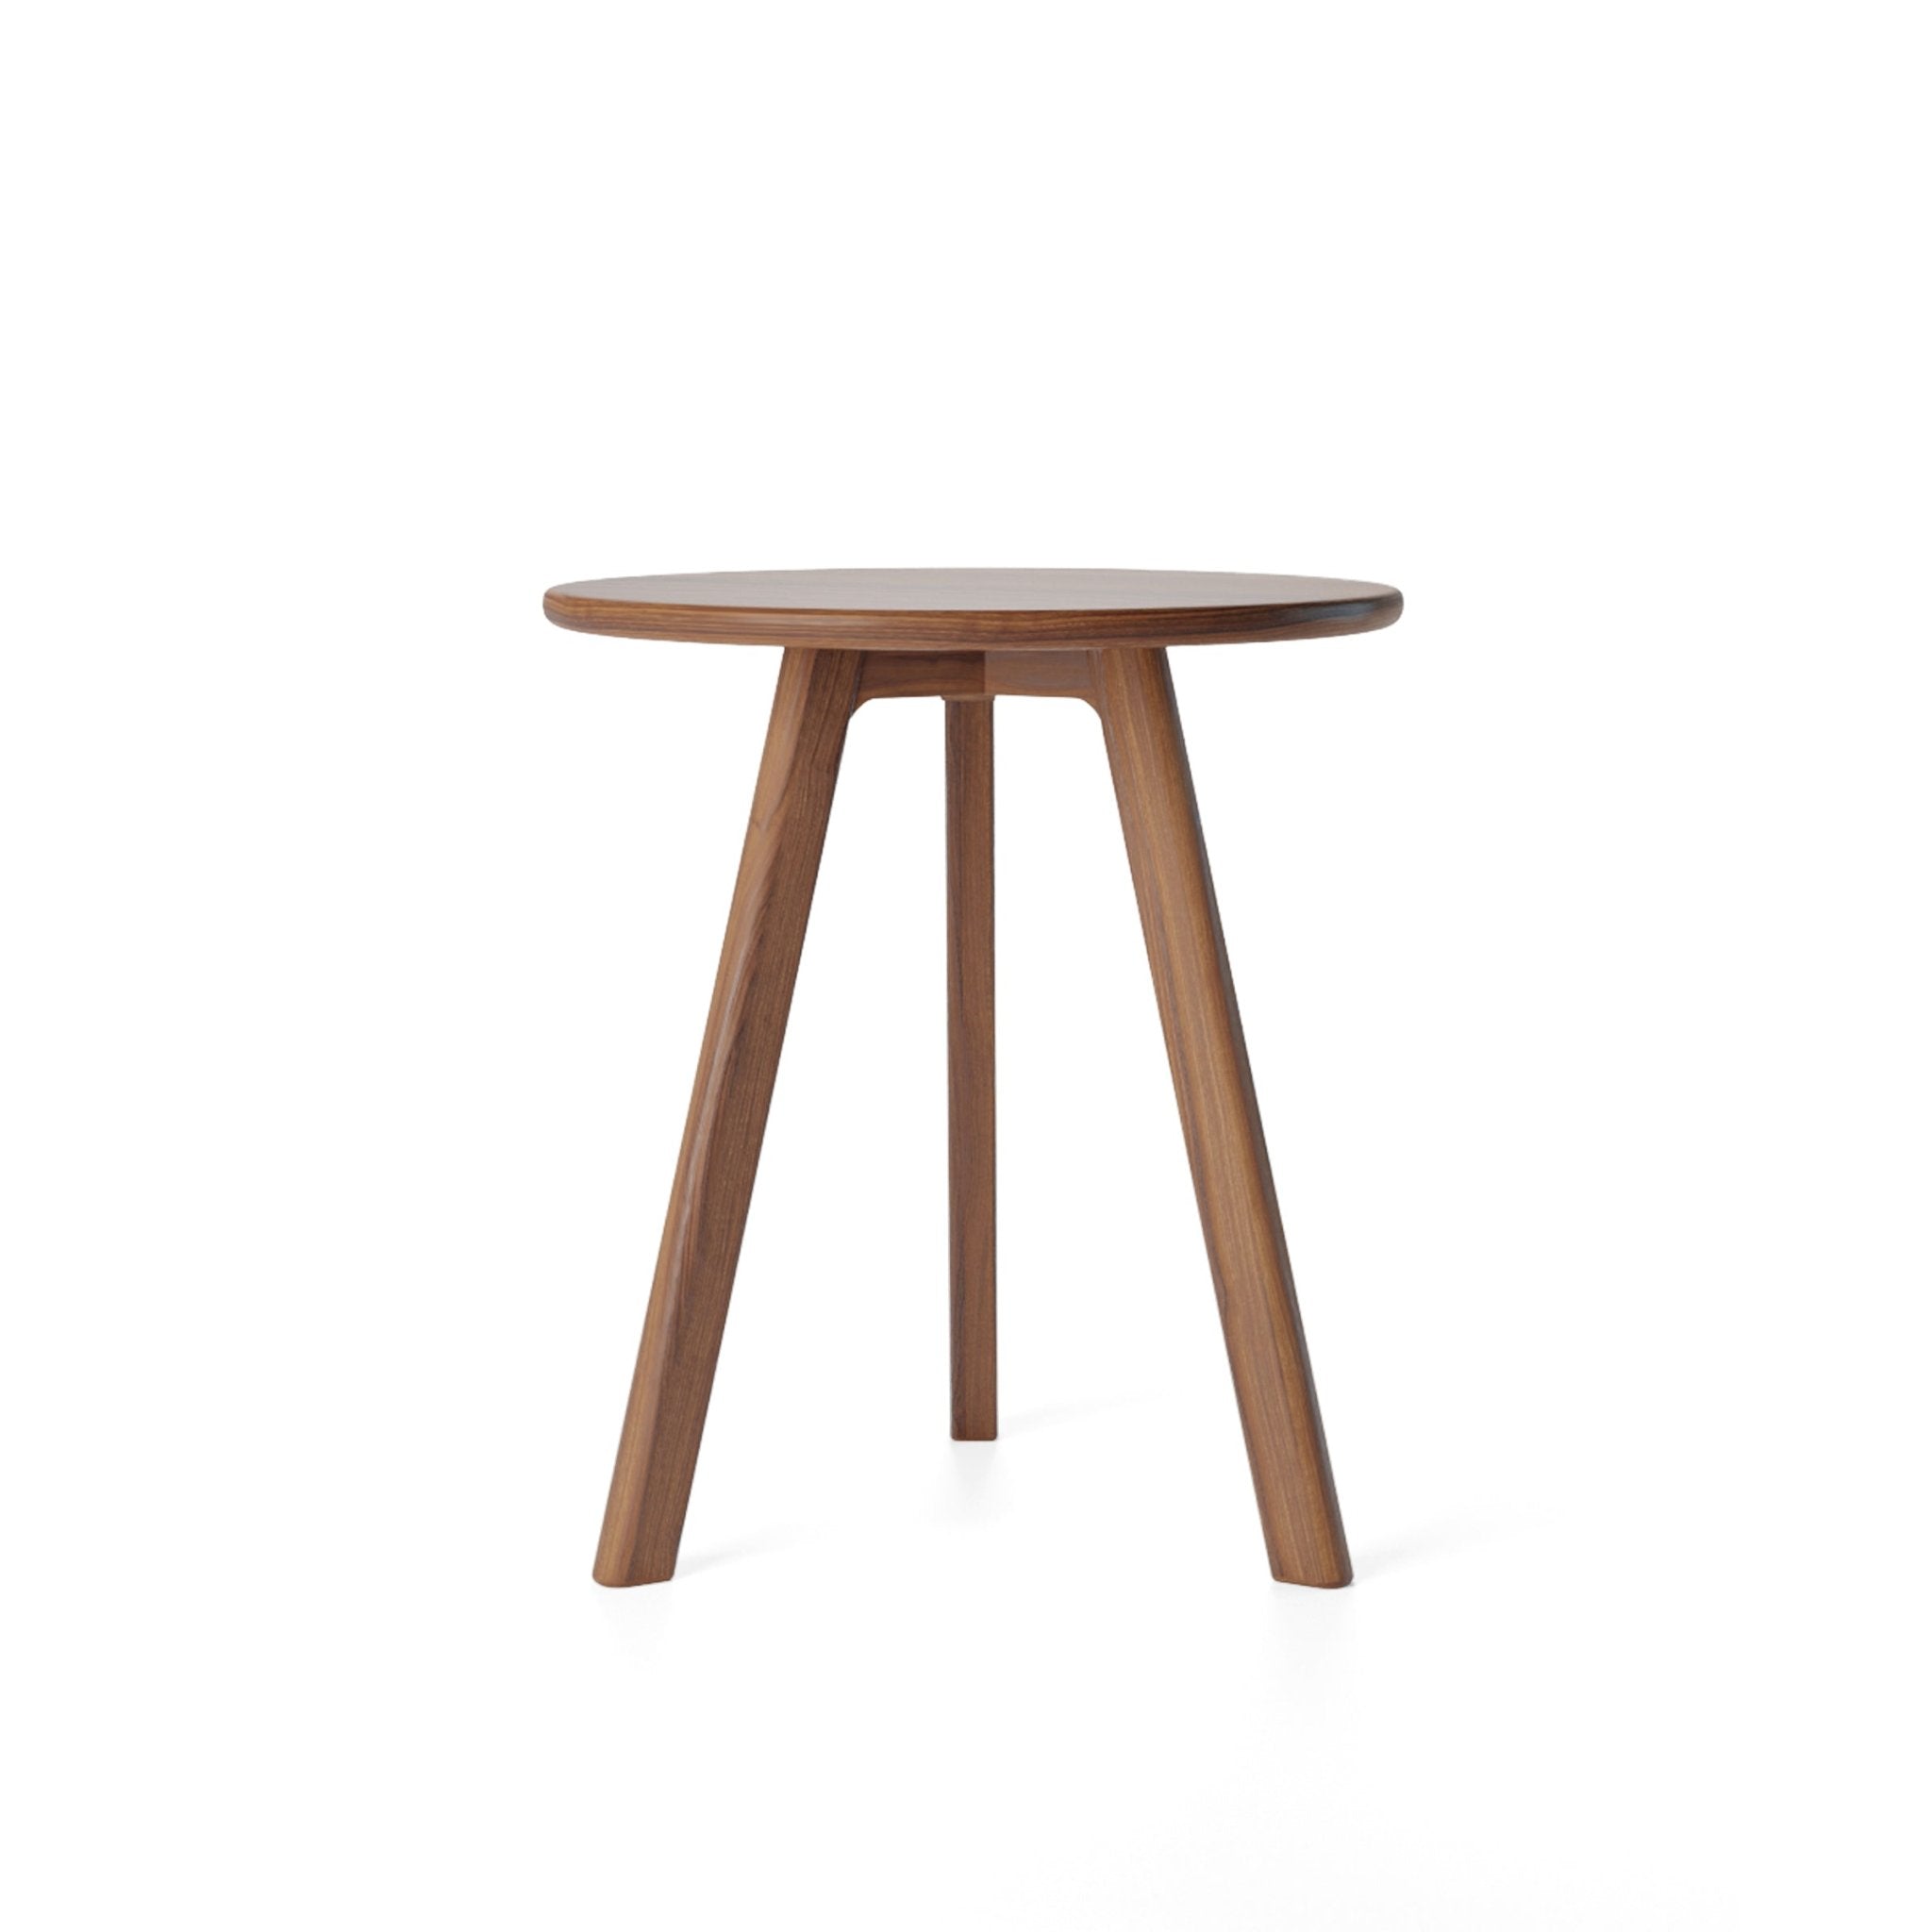 This round side table is a modern and stylish addition to any room. It features a round, walnut design and is made of dark wood. The small size of the table makes it perfect for use as a coffee table or occasional table. The simple, wooden design is enhanced by its cherry accent and handmade construction. Add a touch of sophistication to your space with this versatile and functional side table